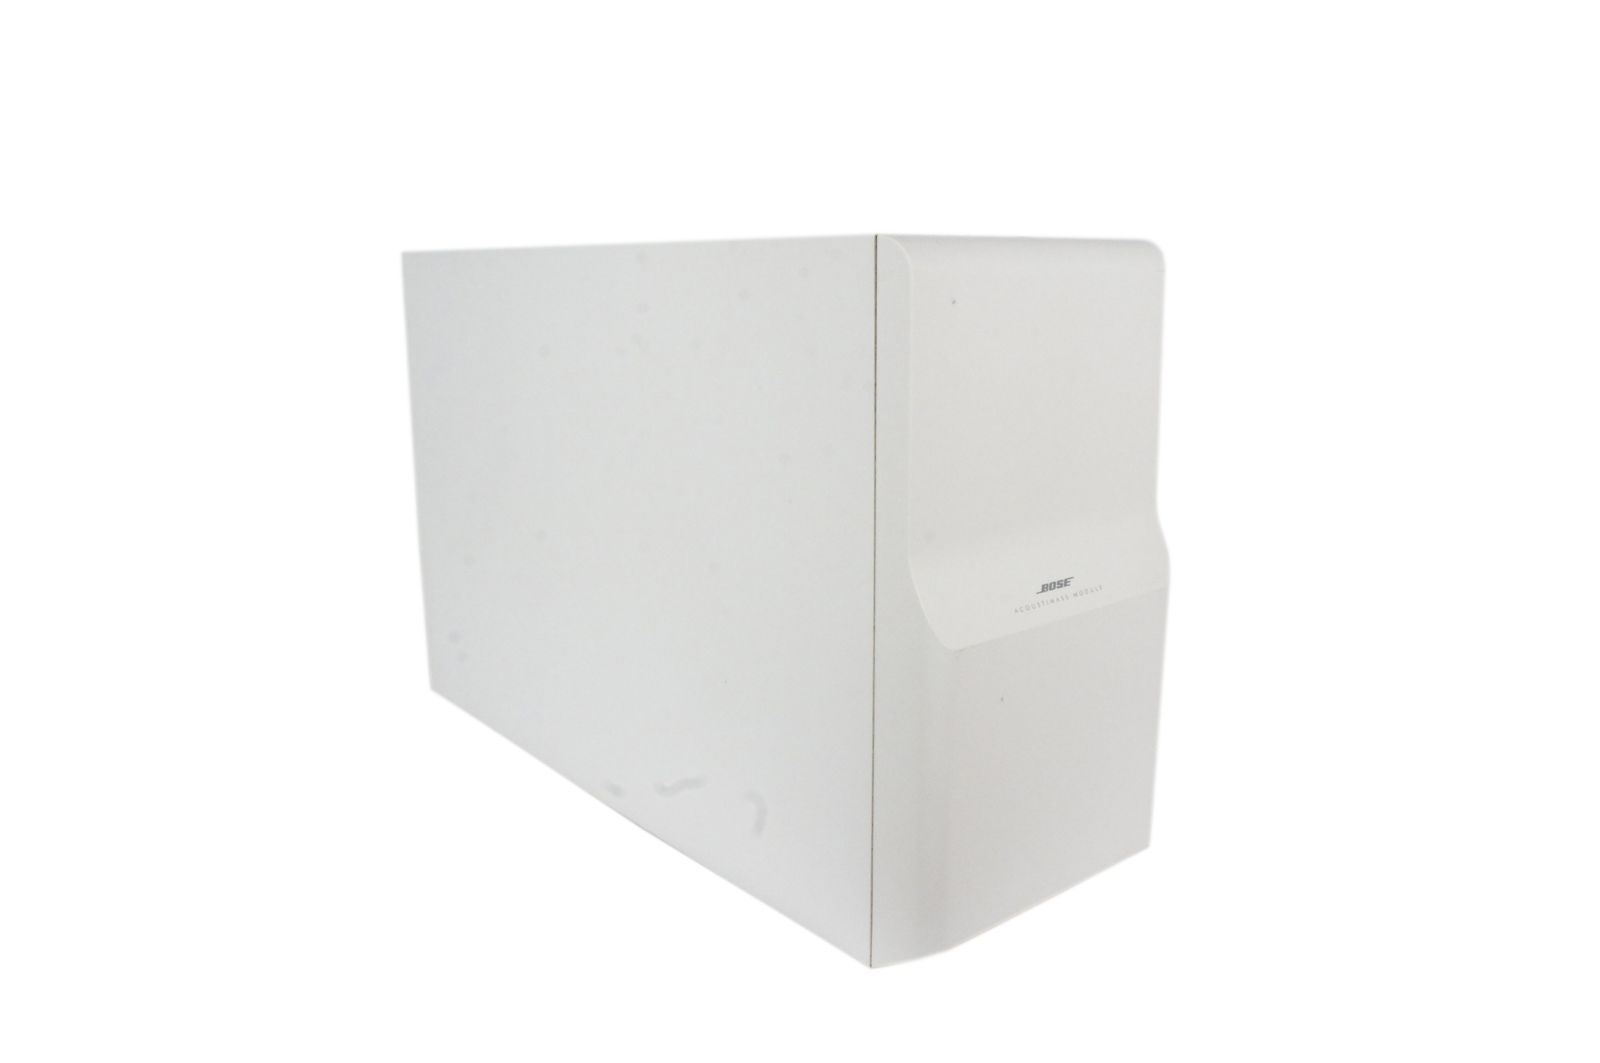 Bose_Acoustimass_10_5.1_Subwoofer_Weiss_inkl_05